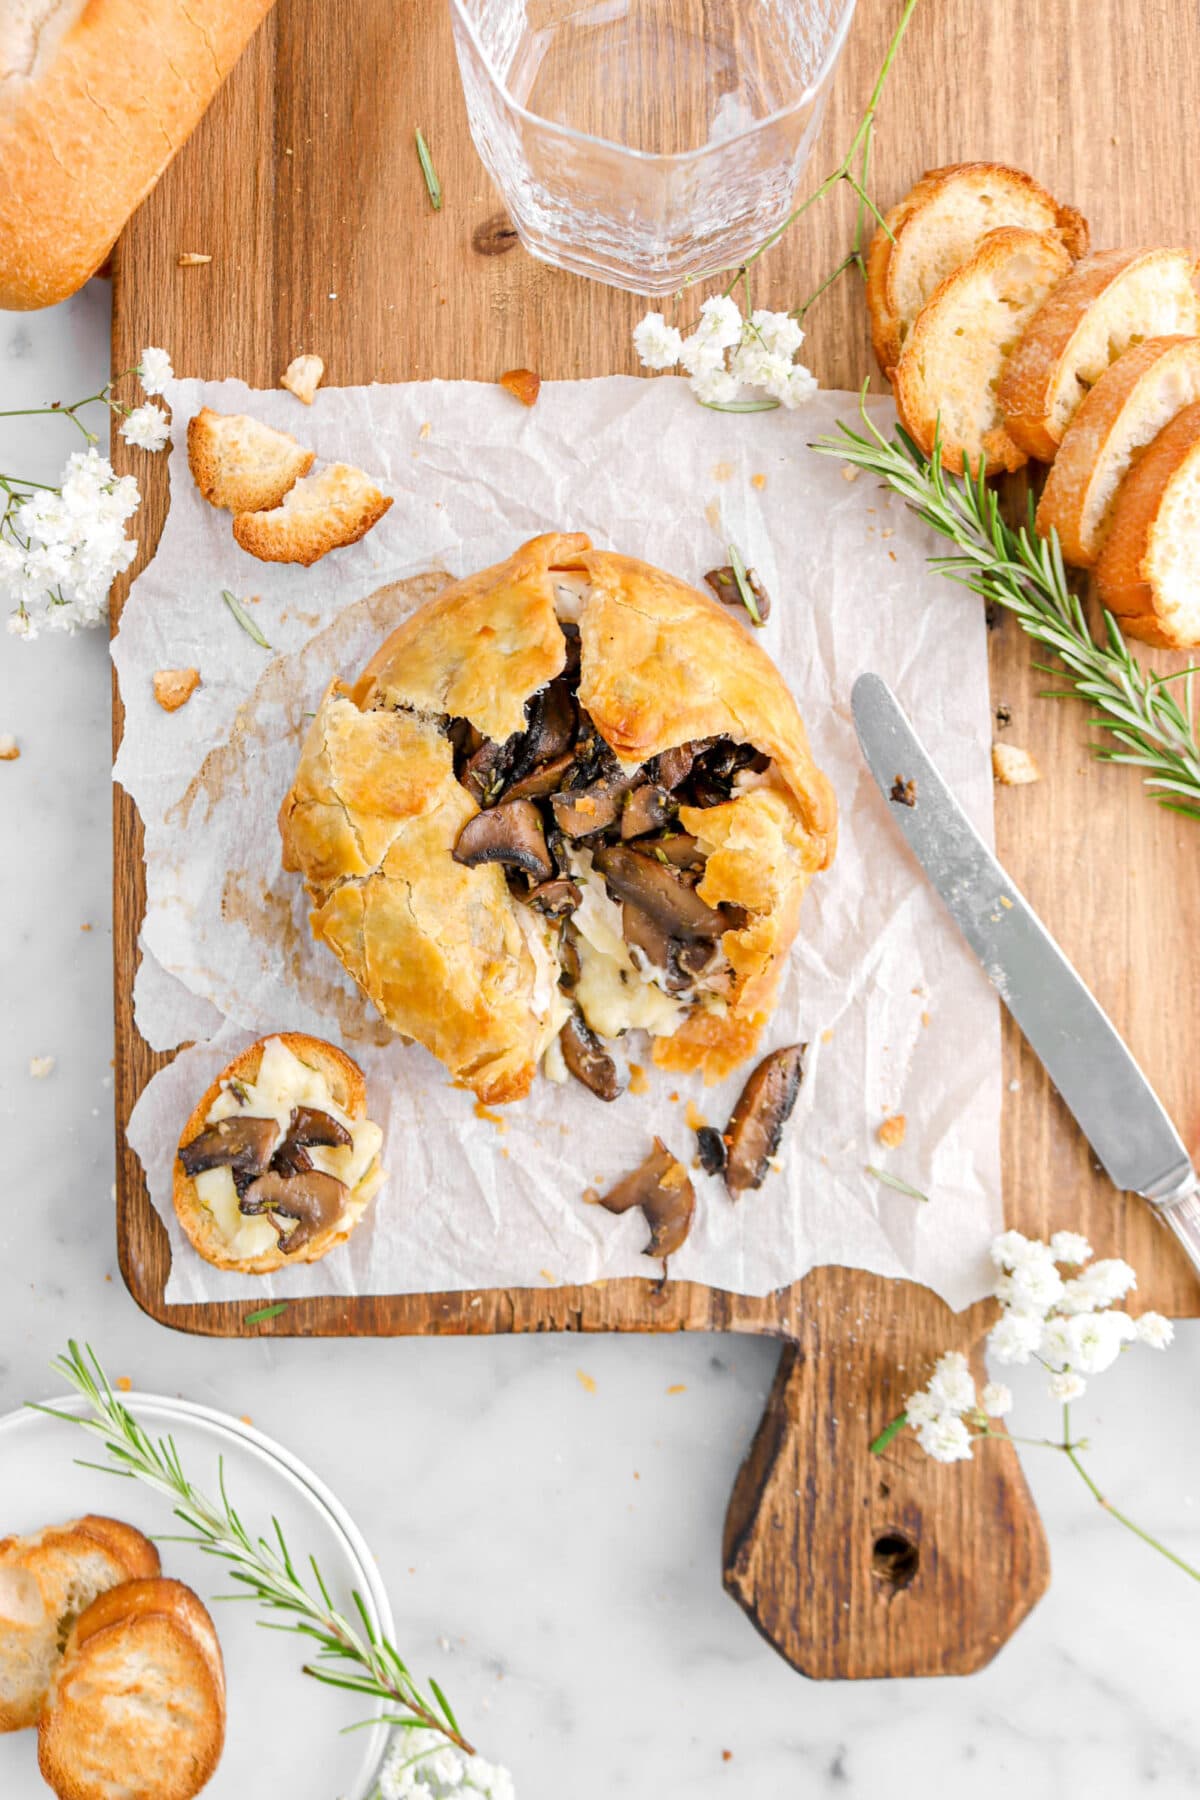 baked brie spilling out of puff pastry with piece of bread beside on parchment paper, white flowers, a knife, and rosemary sprigs around.